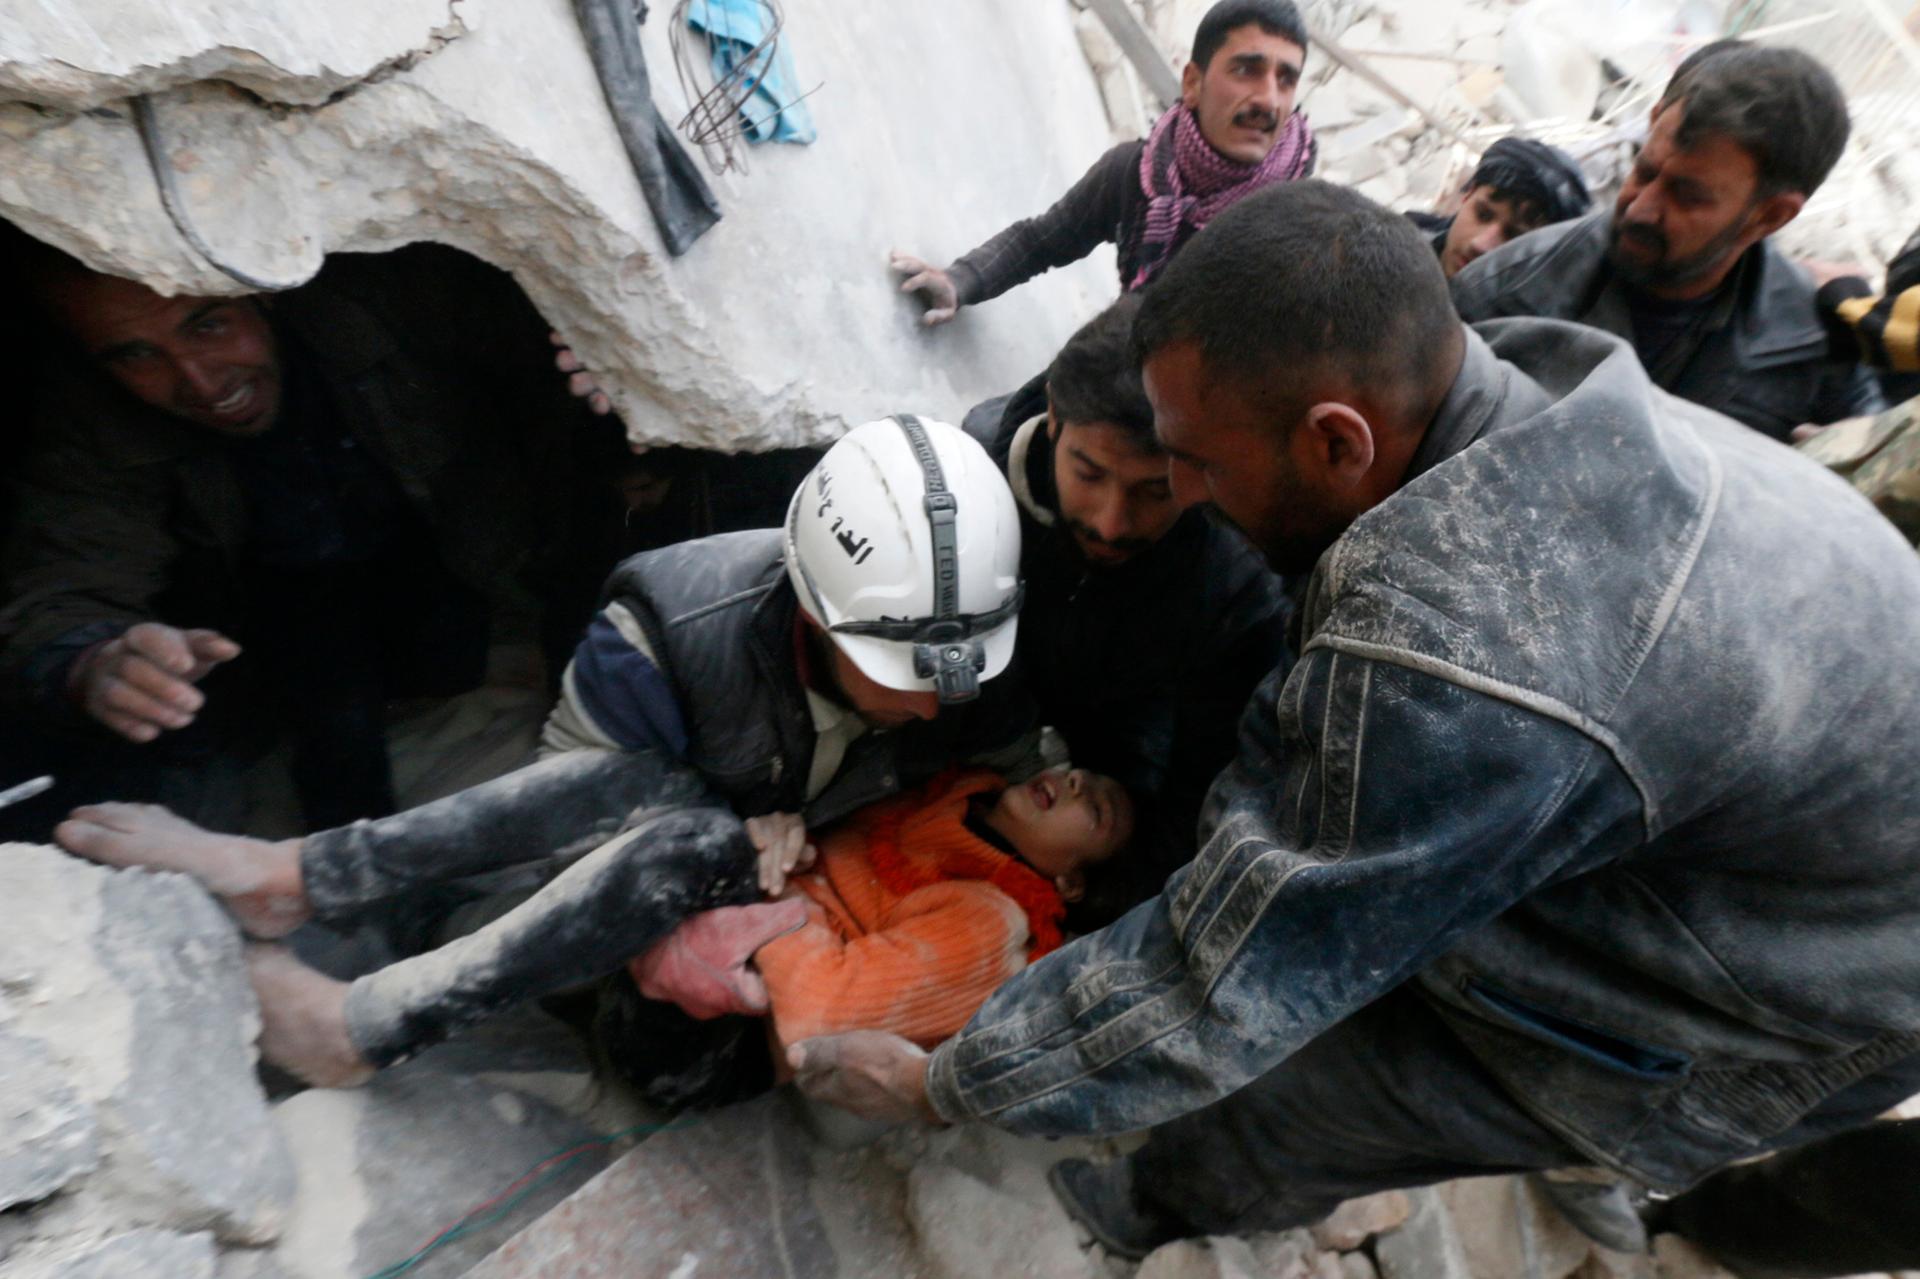 Residents and activists pull a girl from under debris after what activists said were explosive barrels dropped by forces loyal to Syria's President Bashar al-Assad in Aleppo, Syria on February 2, 2014. 